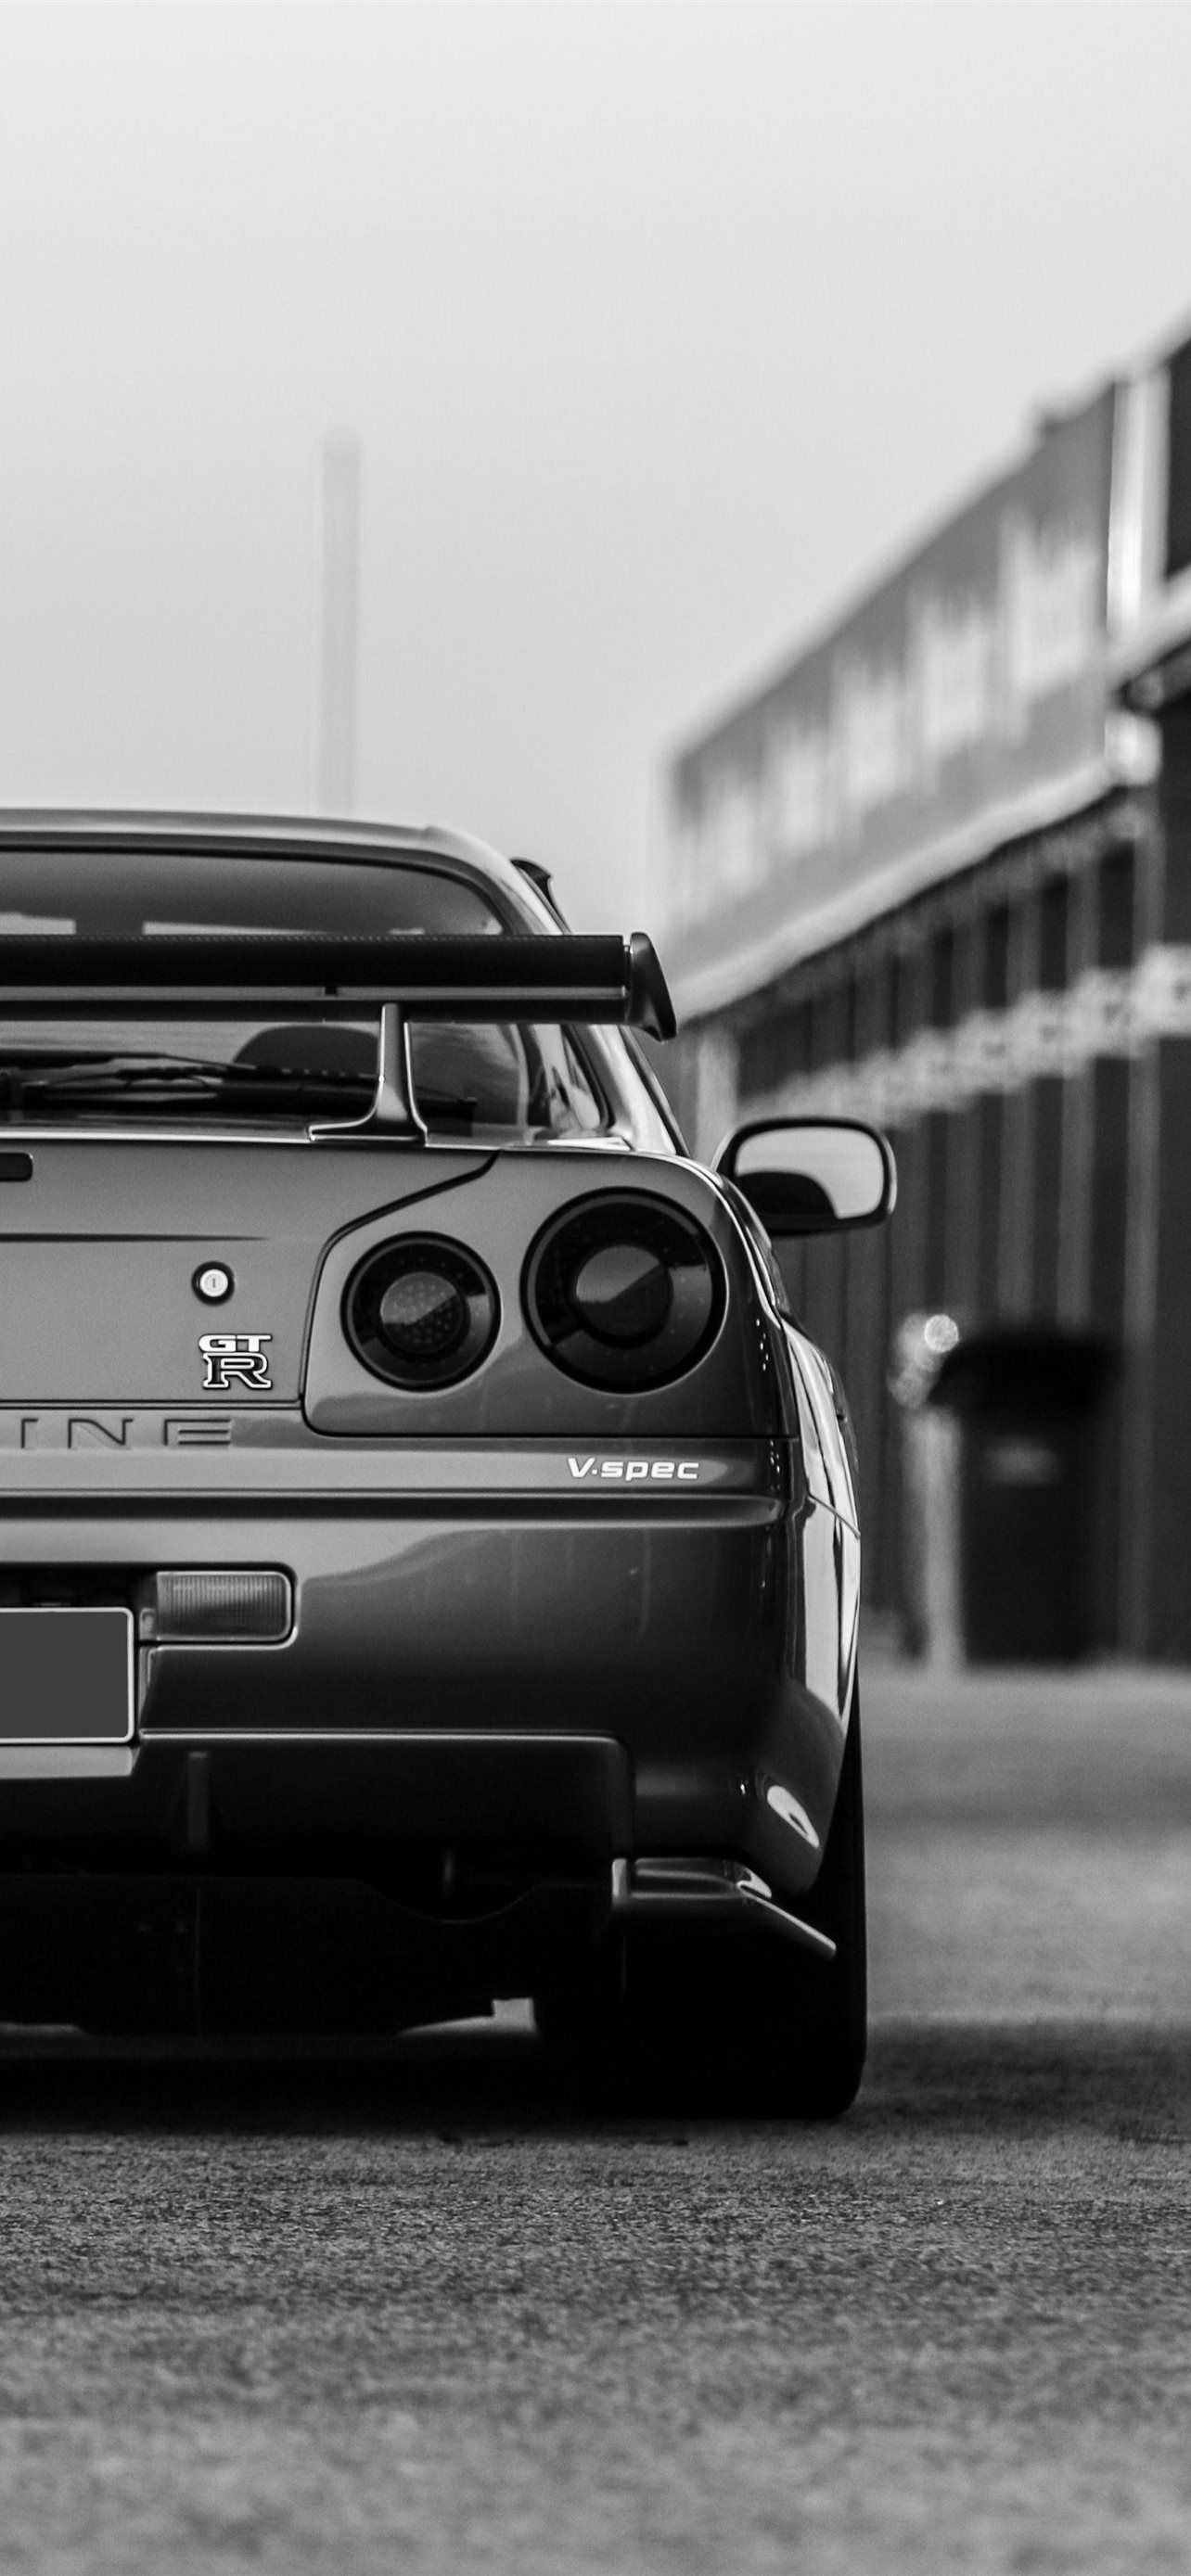 A black and white image of the rear of a Nissan Skyline R34 - Nissan Skyline